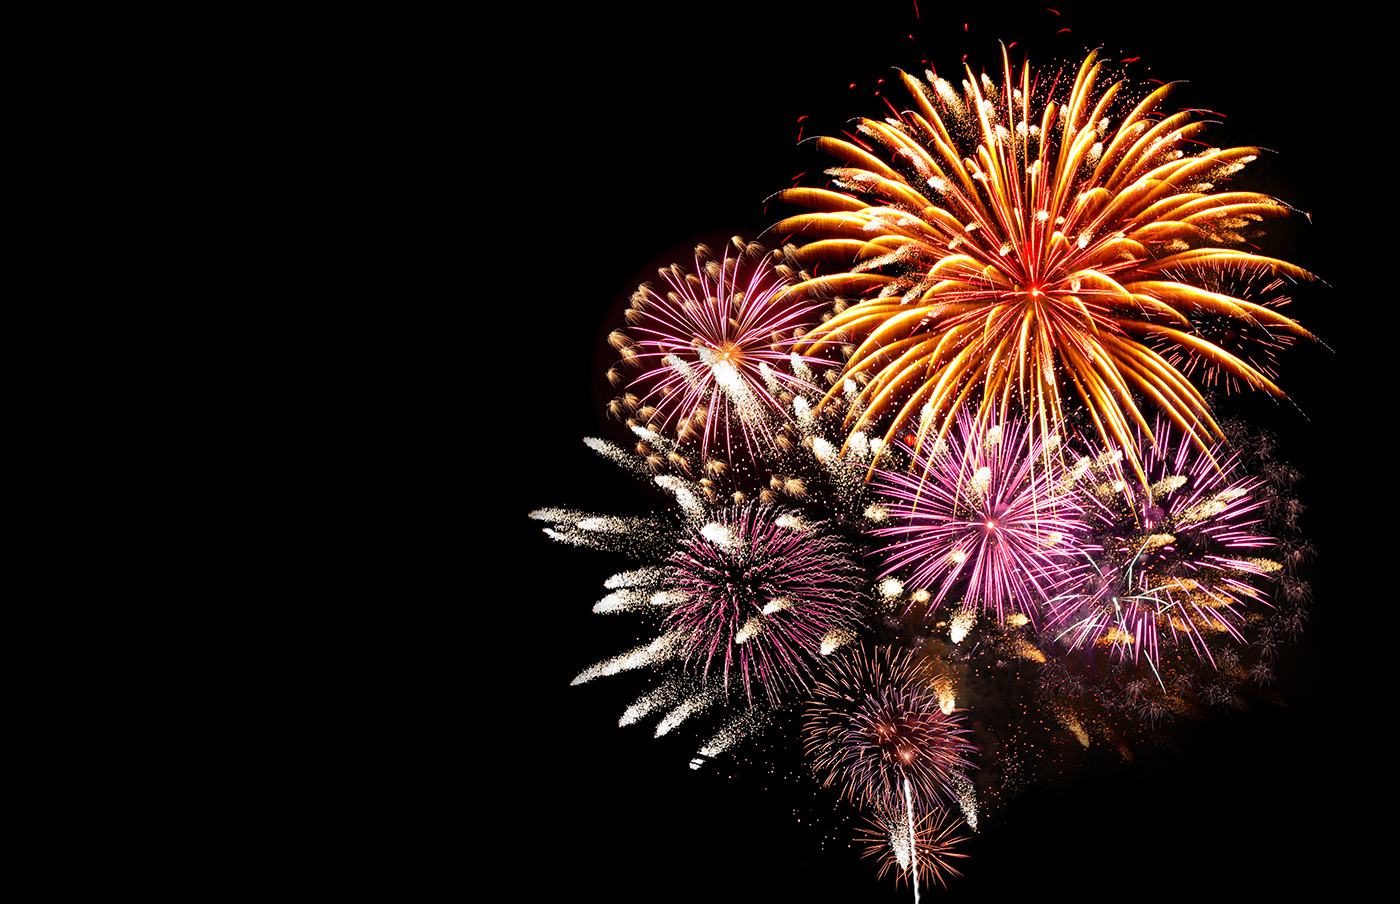 Celebrate with fireworks safely be prepared, be safe, be responsible